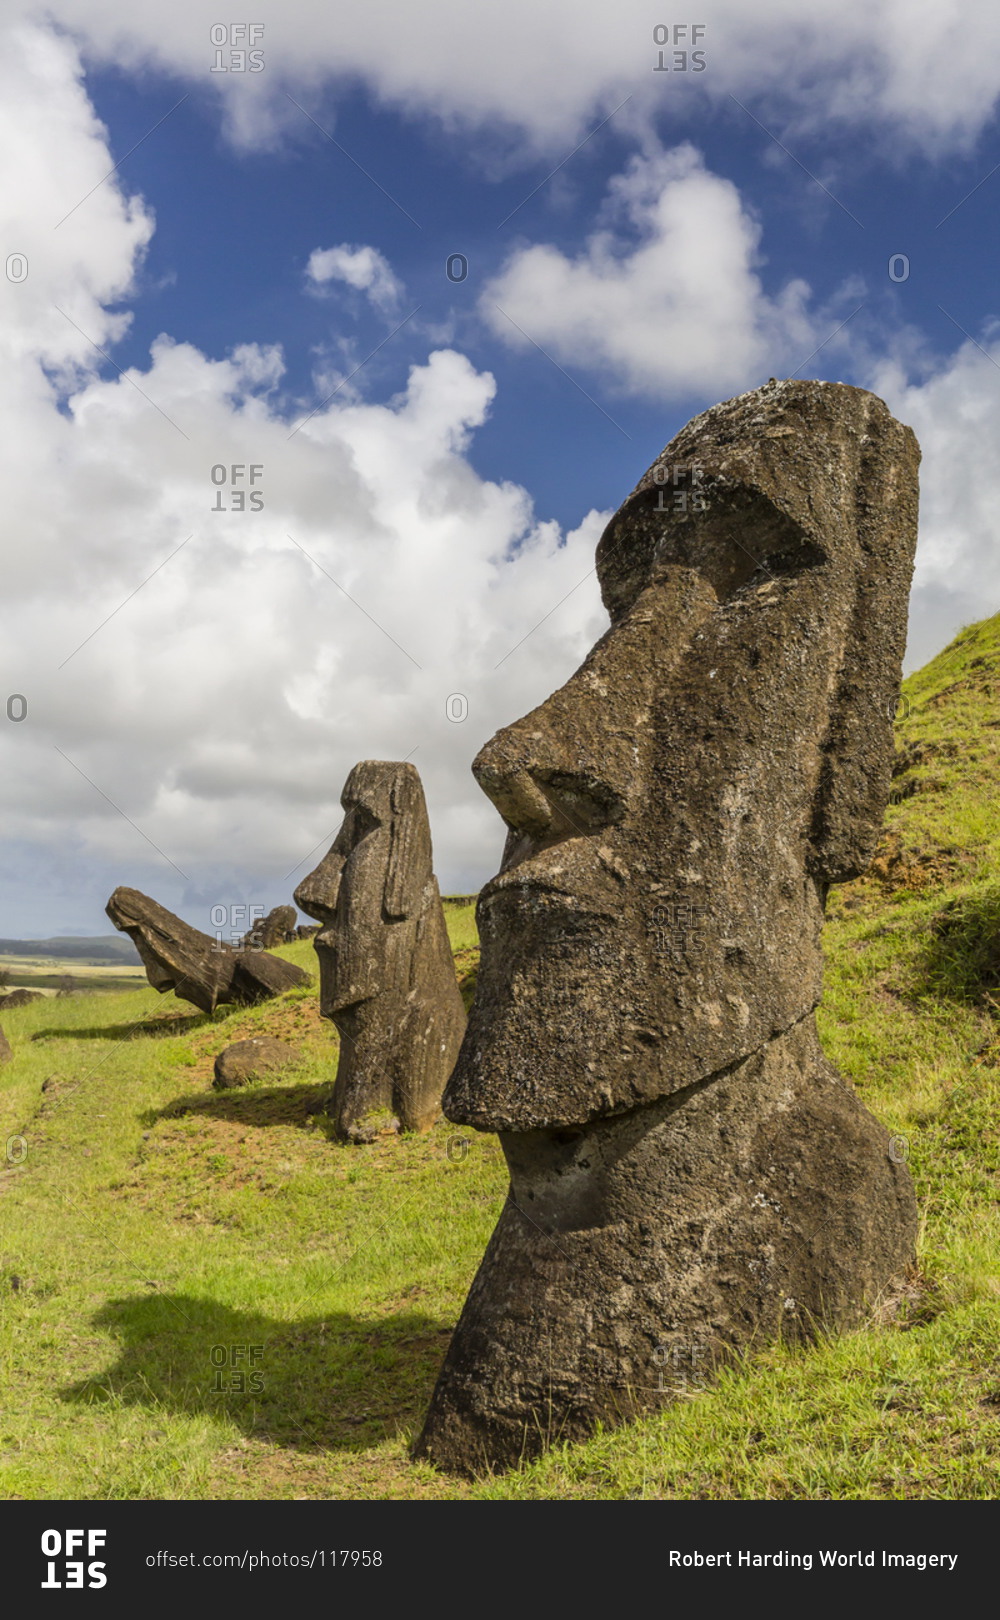 Moai sculptures in various stages of completion at Rano Raraku